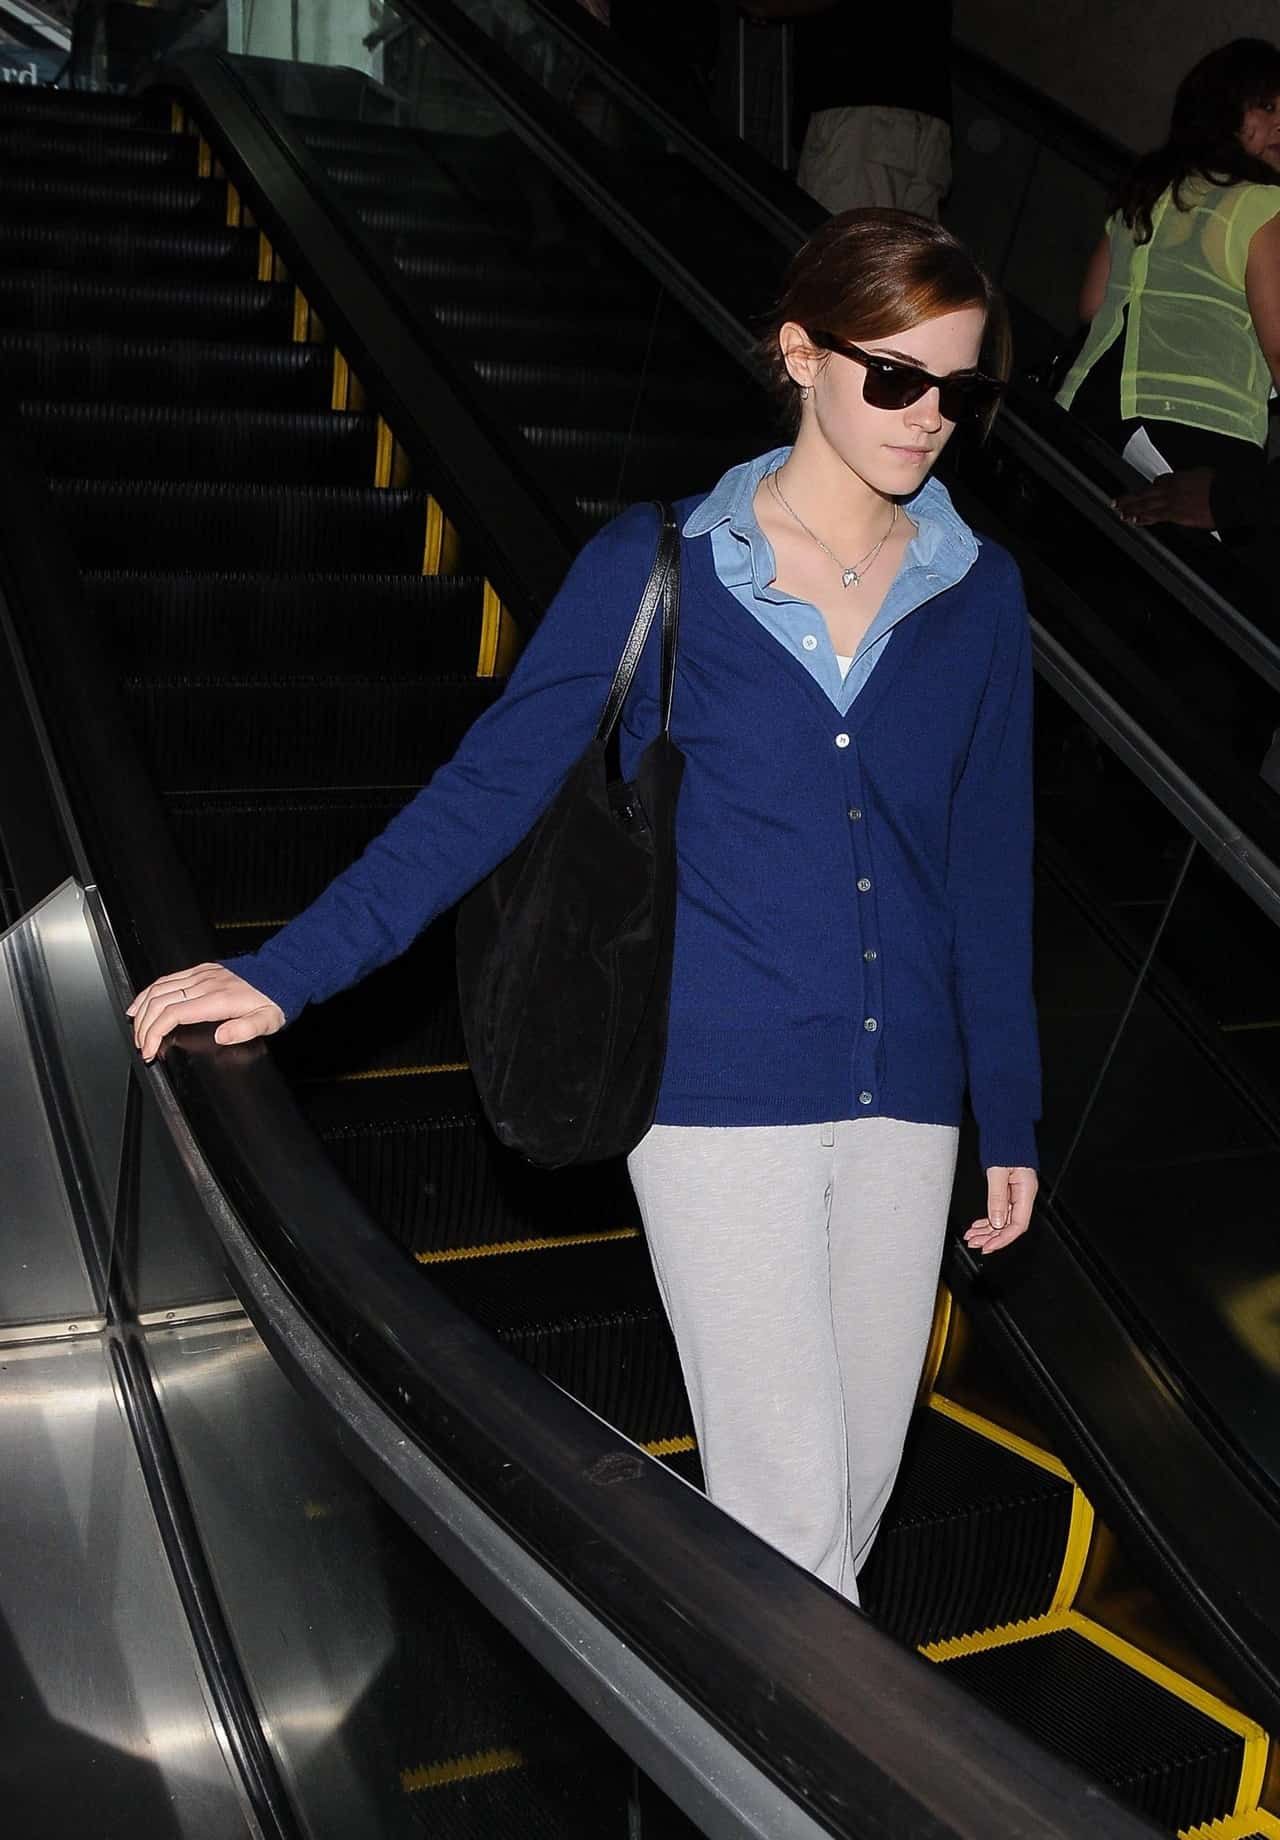 Emma Watson Spotted Leaving LAX Airport in Comfortable Yet Stylish Outfit